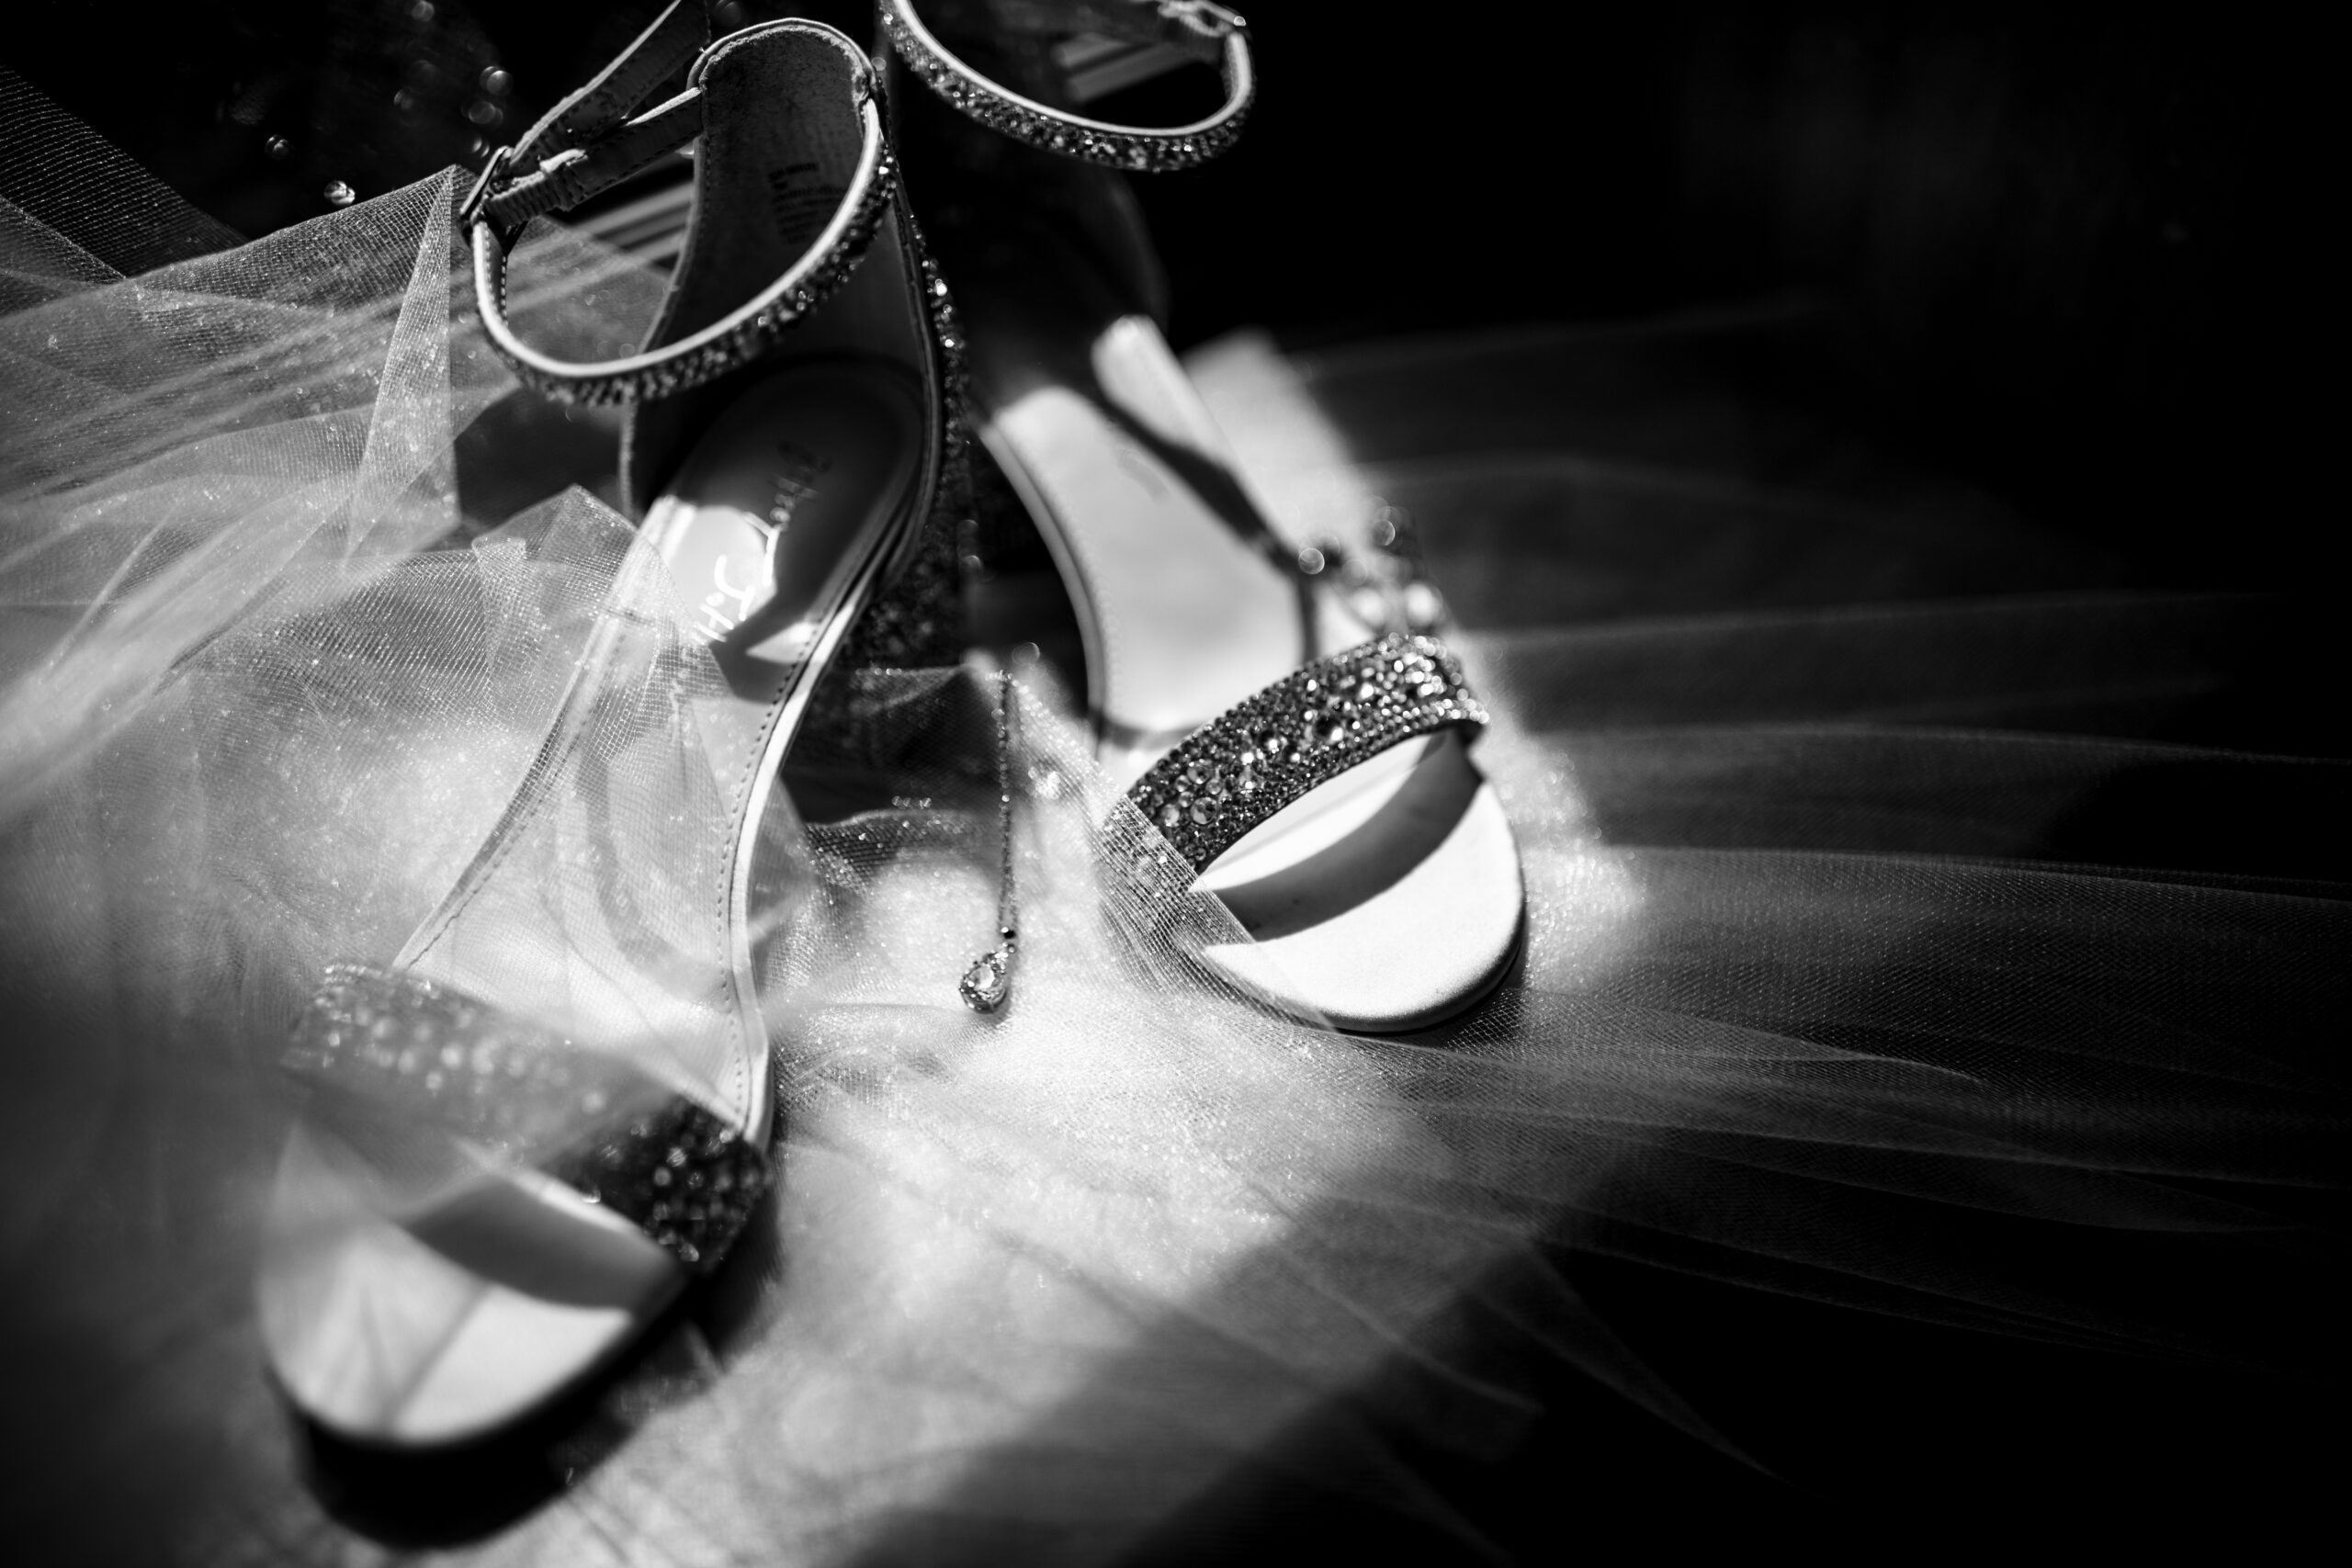 Sparkly wedding shoe and necklace detail flatlay photo 